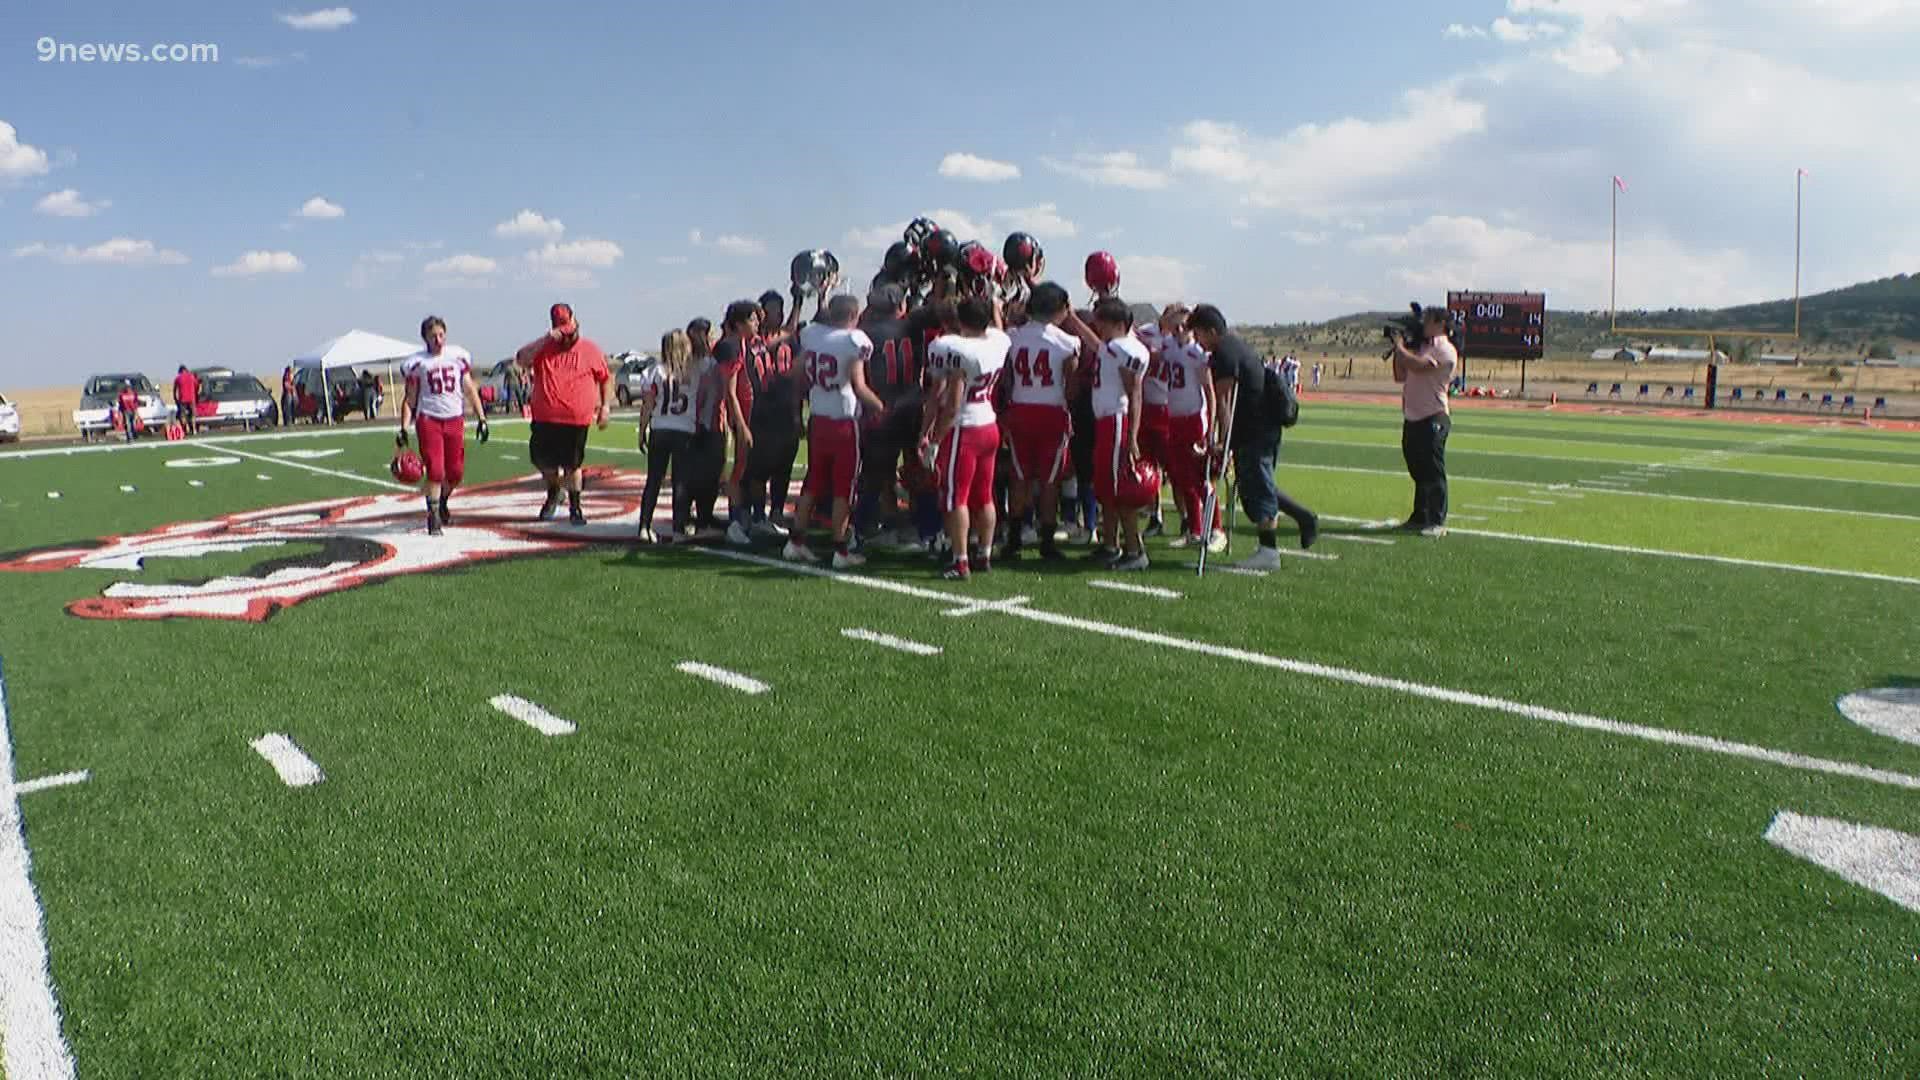 A school in Branson, Colorado was between a rock and hard place when teams refused to play their football team because of the condition of their field.